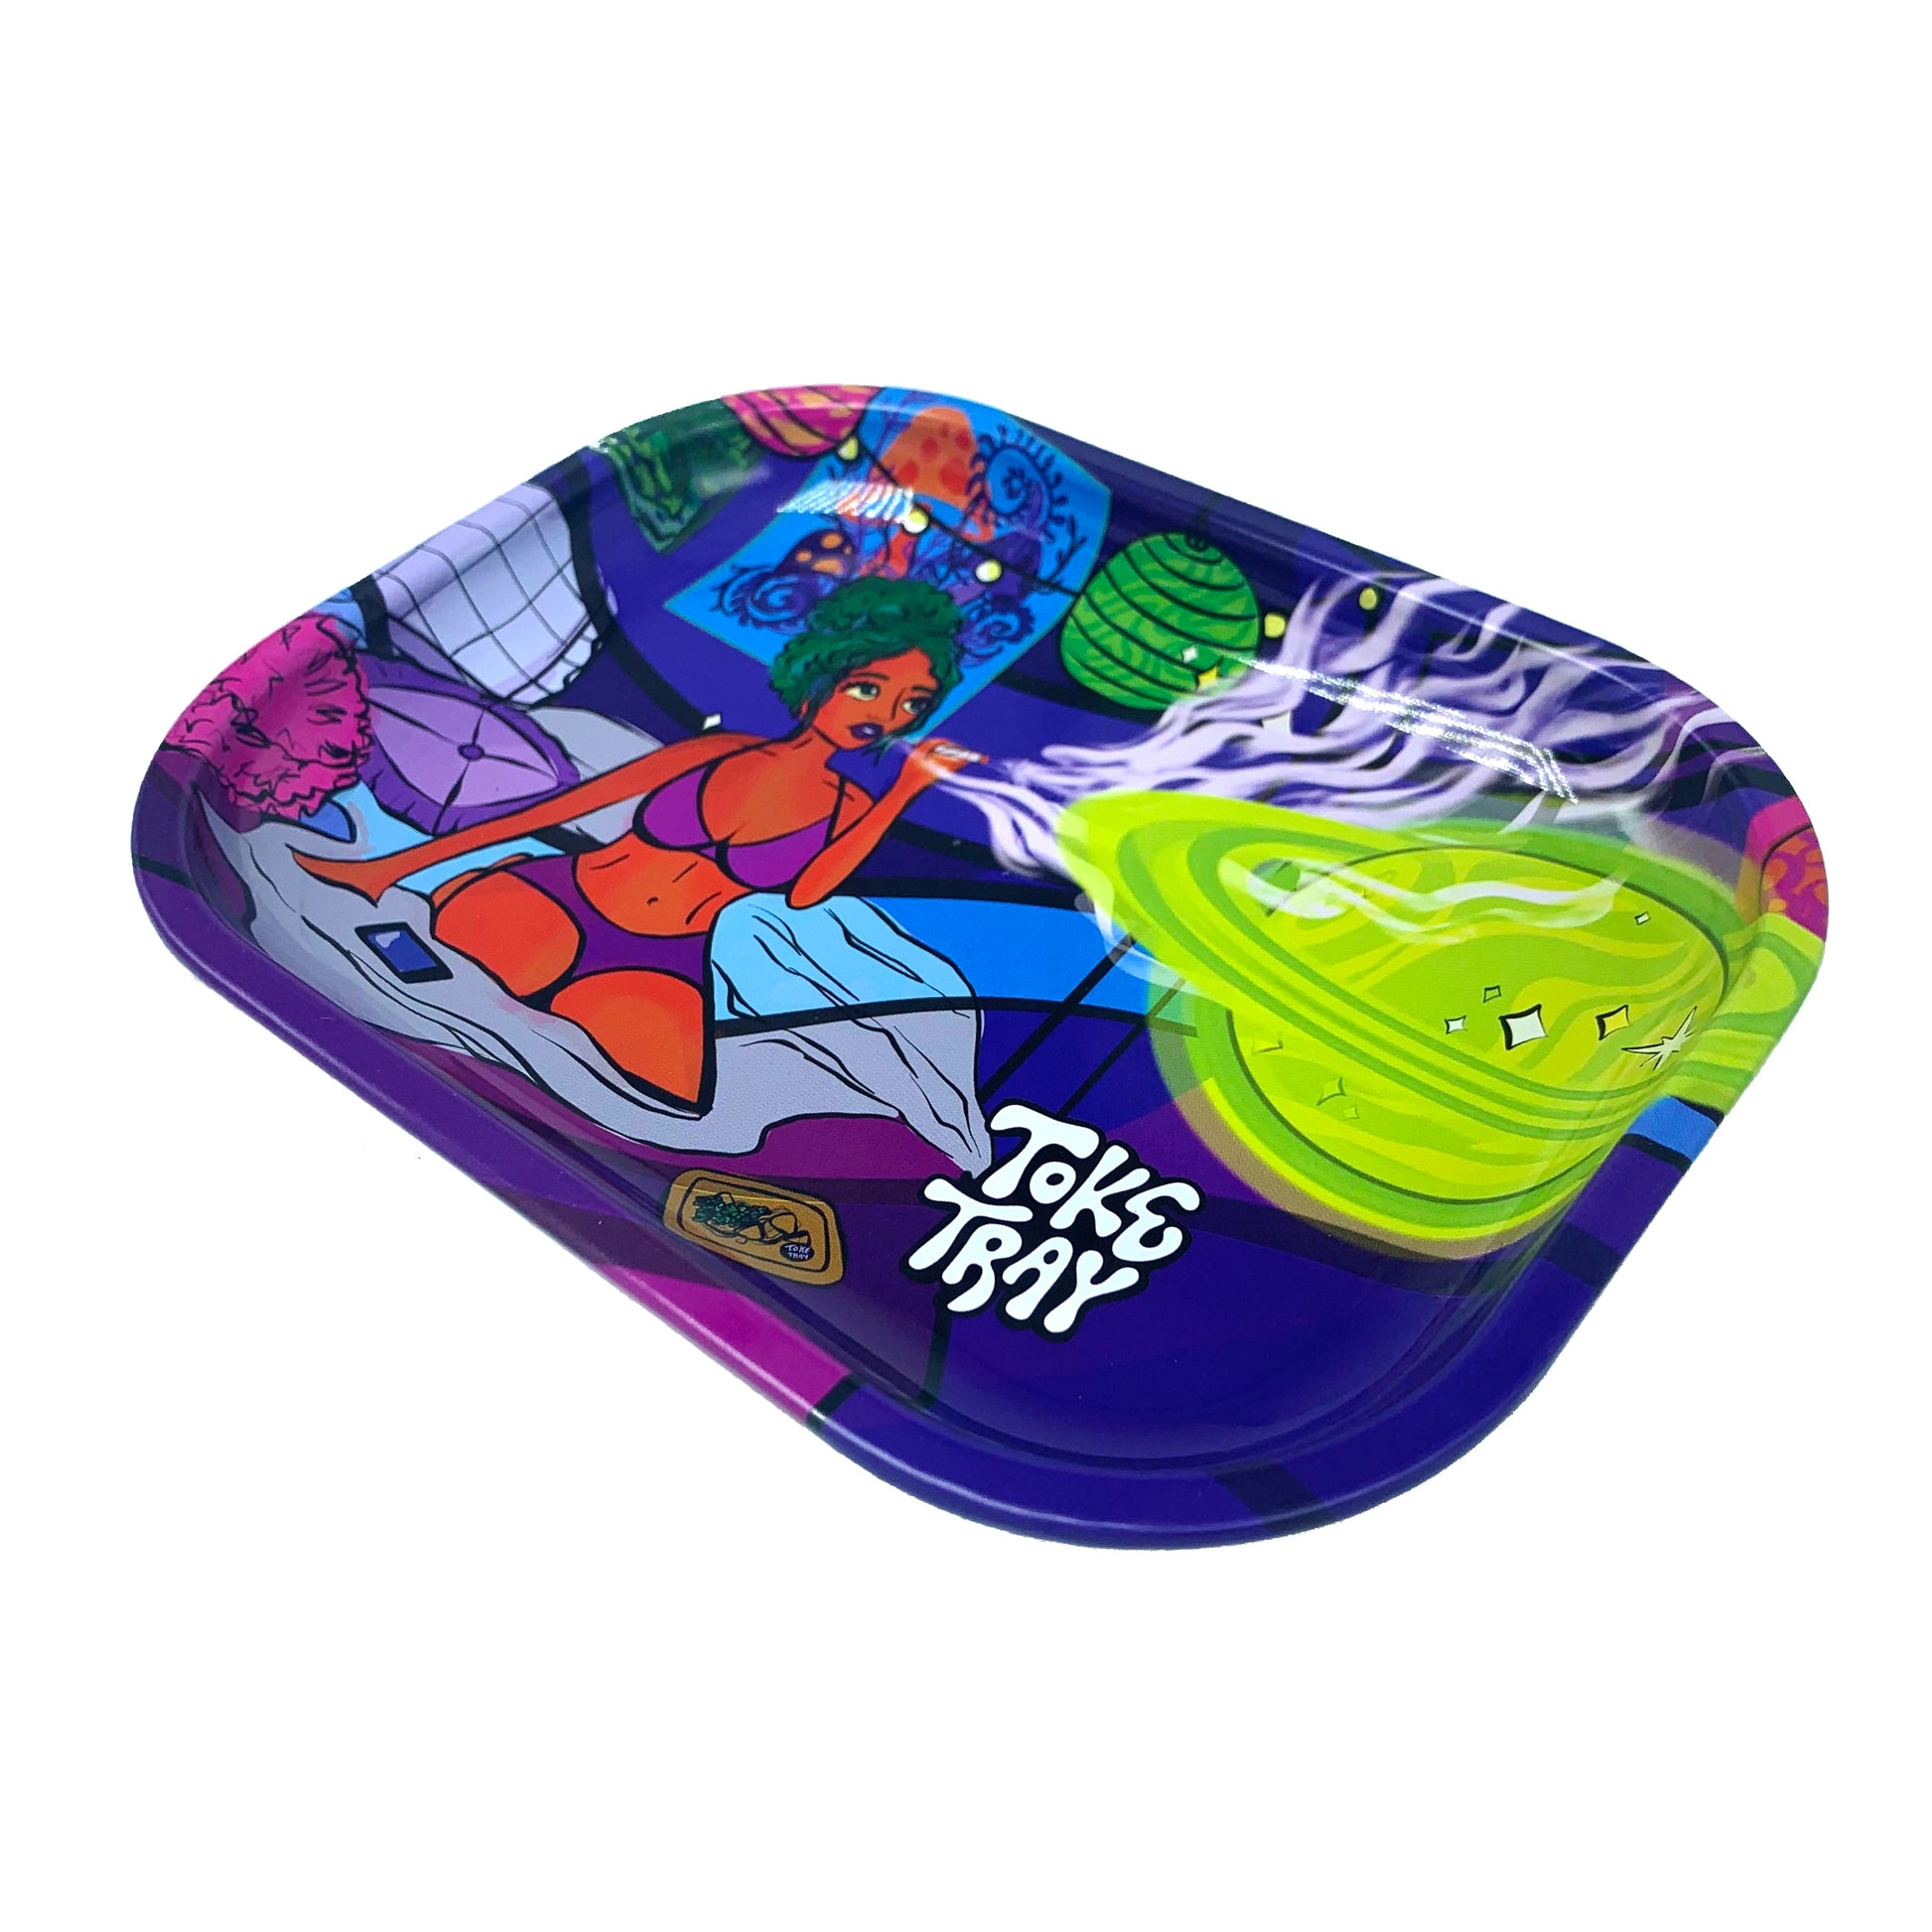  Psychedelic Mushroom Cute Trippy Metal Rolling Tray Design by  Toke Tray - Smoking Accessories (Yellow, Small) : Health & Household